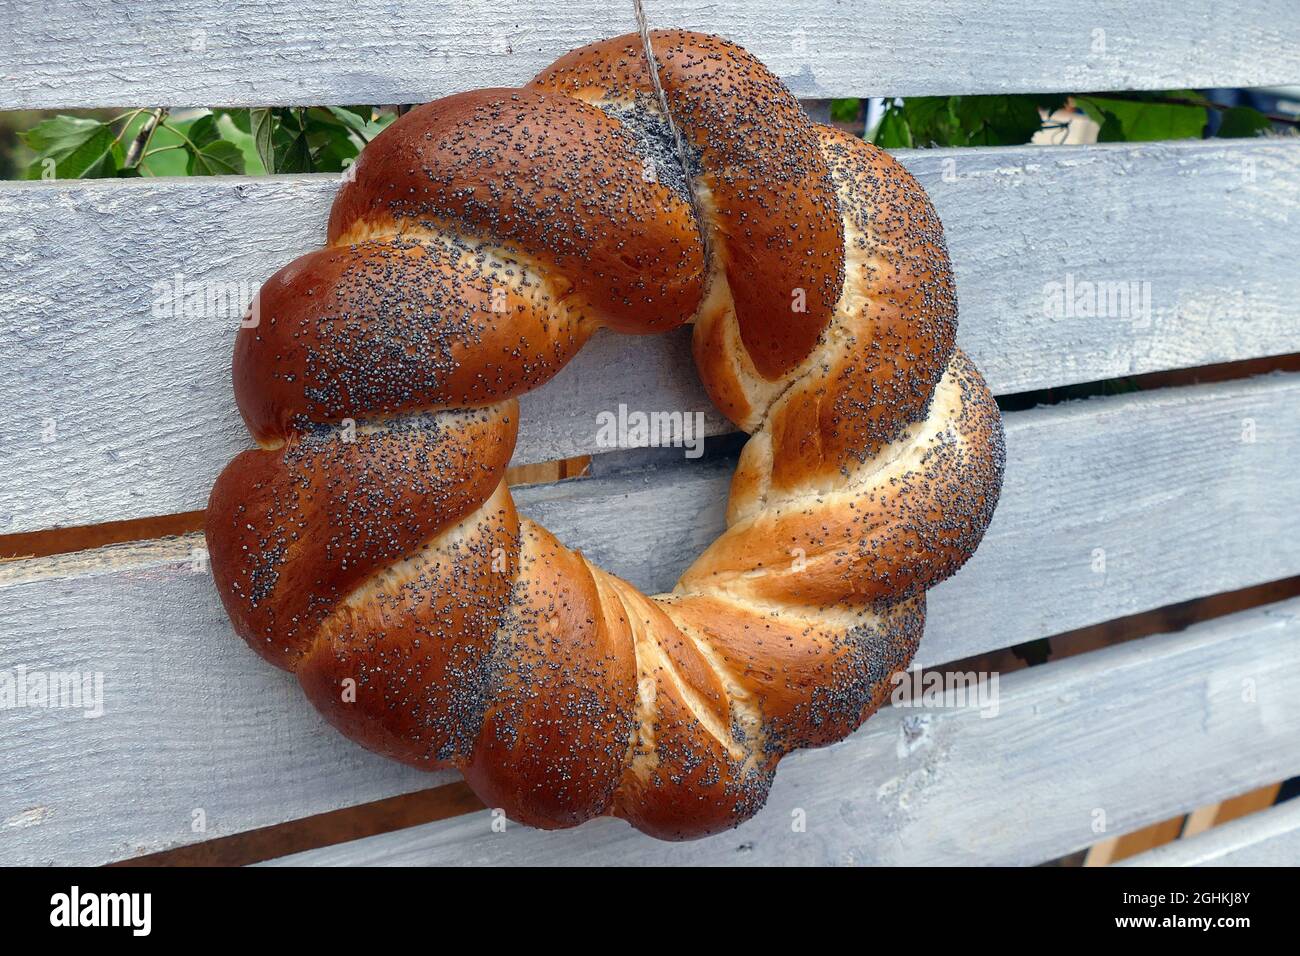 Non Exclusive: IVANO-FRANKIVSK, UKRAINE - SEPTEMBER 5, 2021 - A kolach (ring-shaped bread) is pictured during the Bread Festival 2021 in Ivano-Frankiv Stock Photo